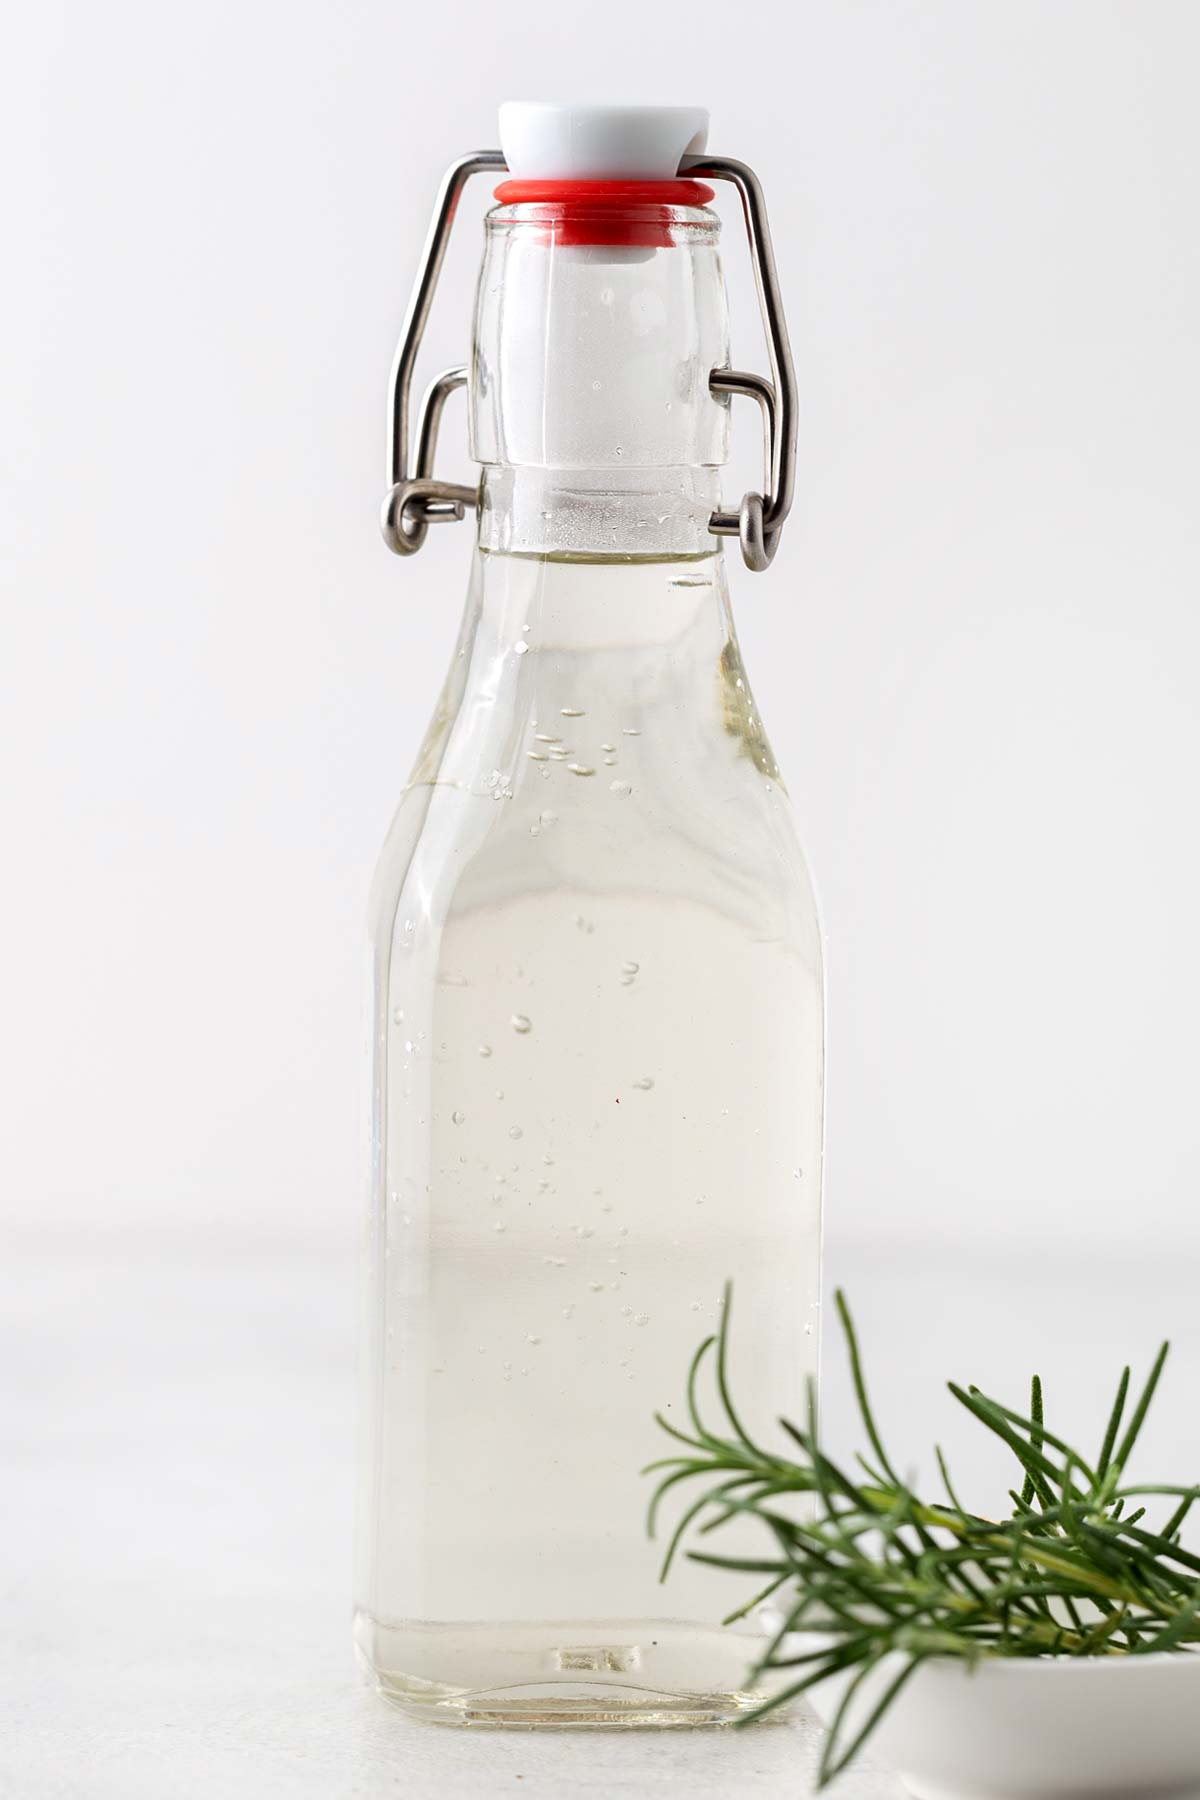 Rosemary syrup in a glass container.